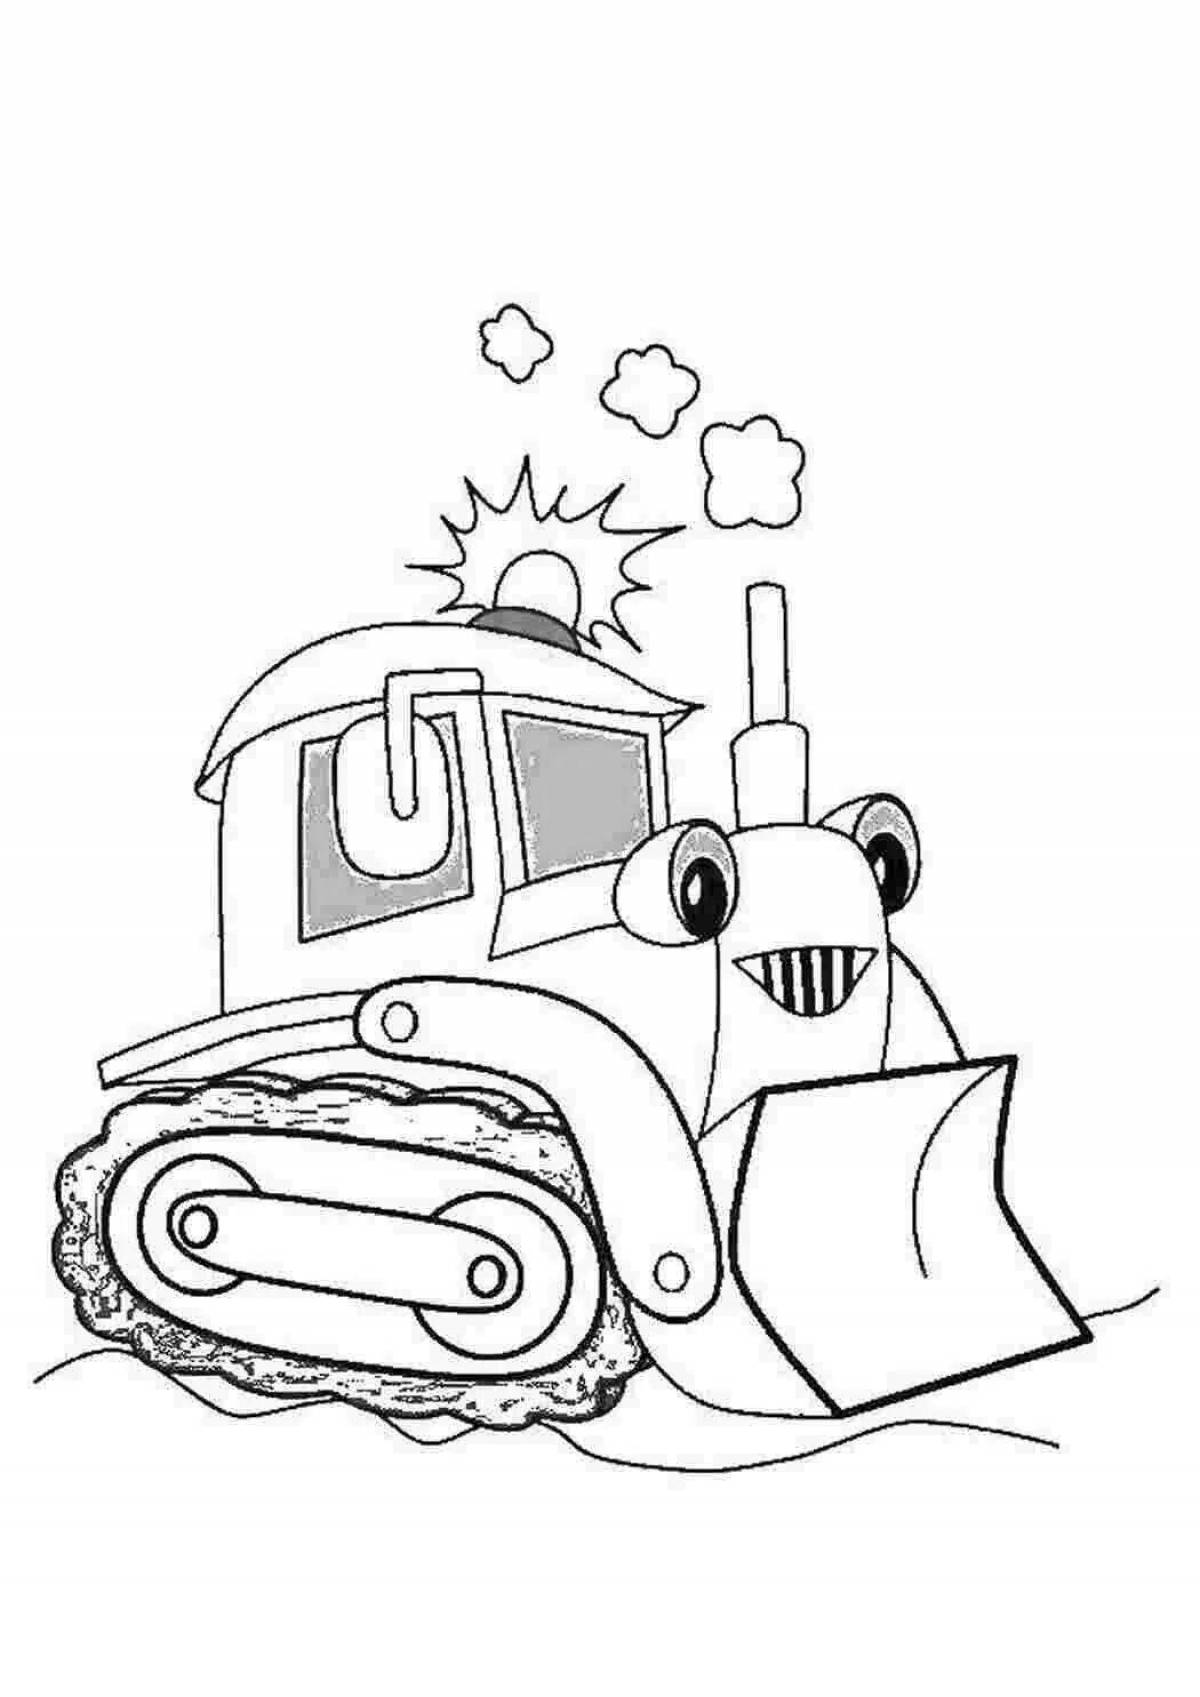 Children's snow blower coloring book